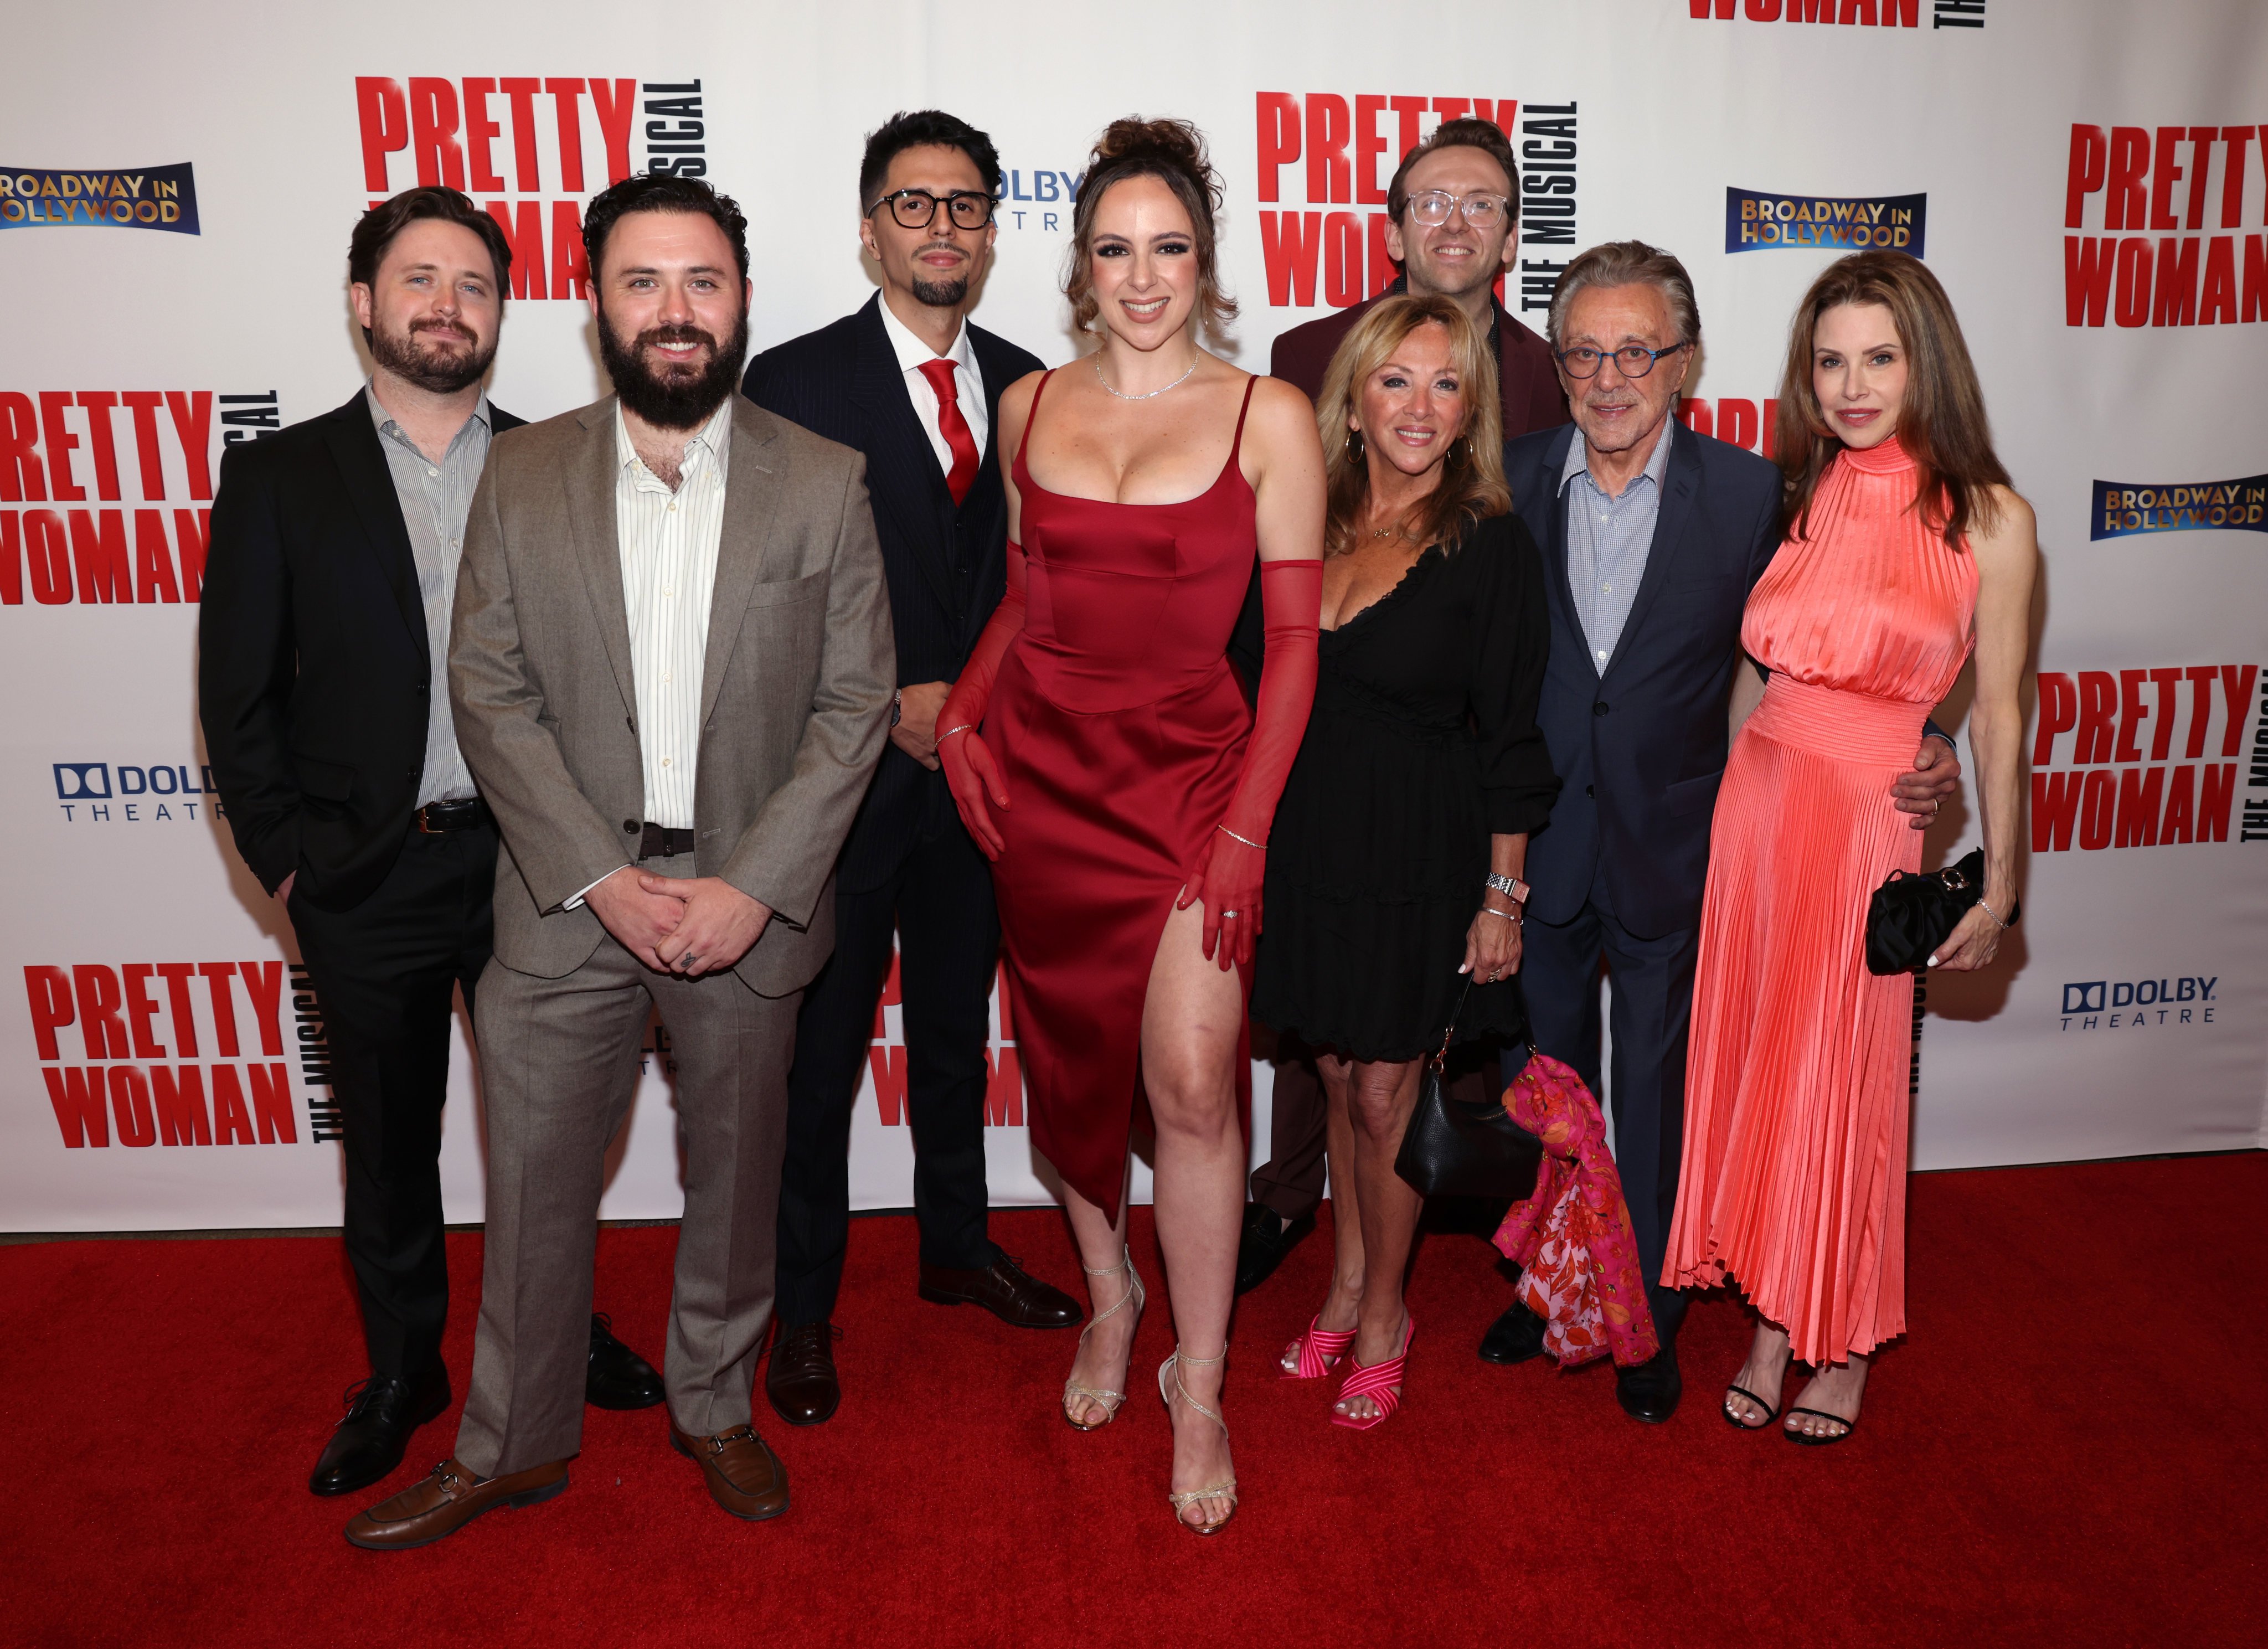 Frankie Valli poses with his sons Brando Valli, Emilio Valli, granddaughter Olivia Valli, daughter Antonia Valli, grandson Dario Valli and wife Jackie Jacobs at the Los Angeles opening night for Pretty Woman The Musical, in June 2022 – but where’s his eldest, Francesco? Photo: Getty Images